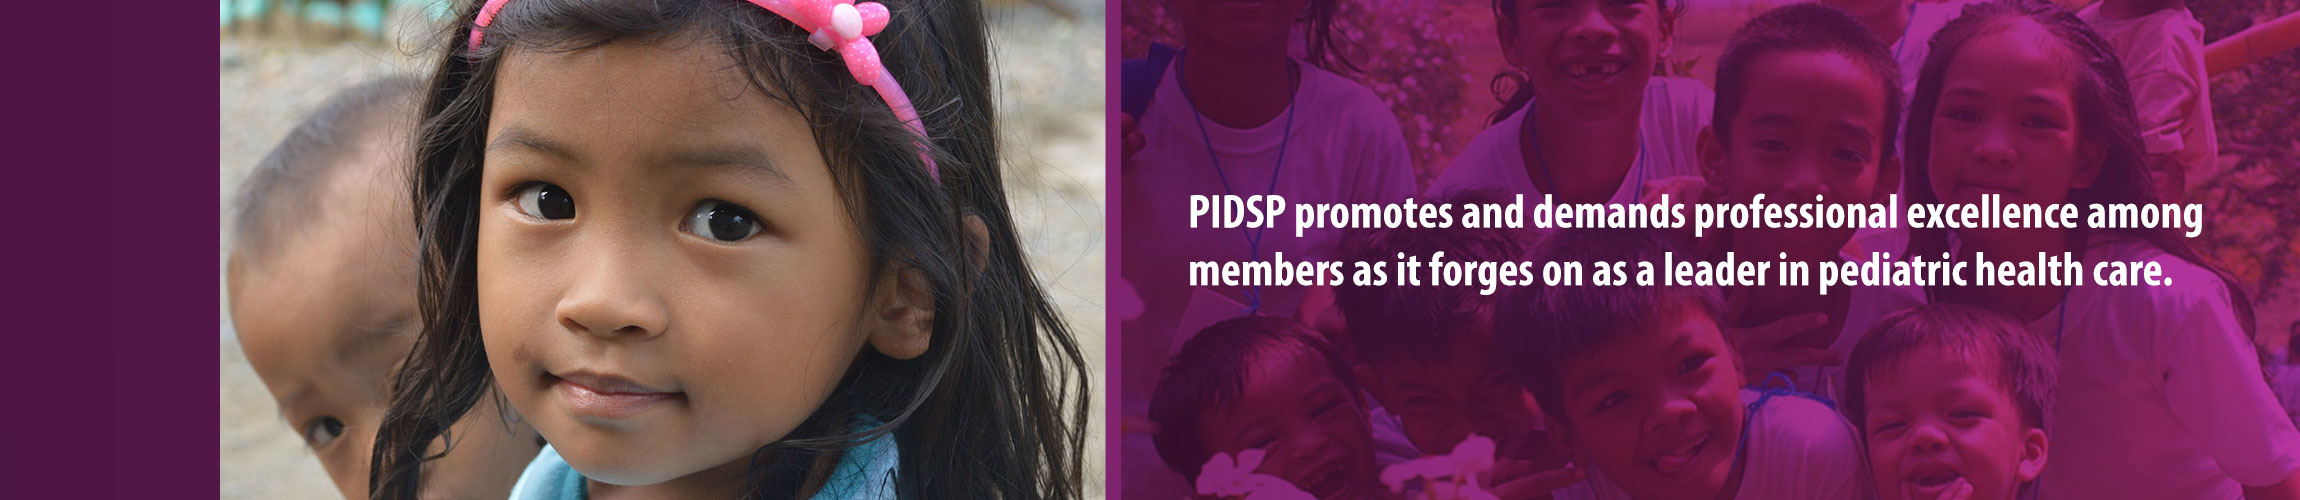 PIDSP : Pediatric Infectious Disease Society of the Philippines